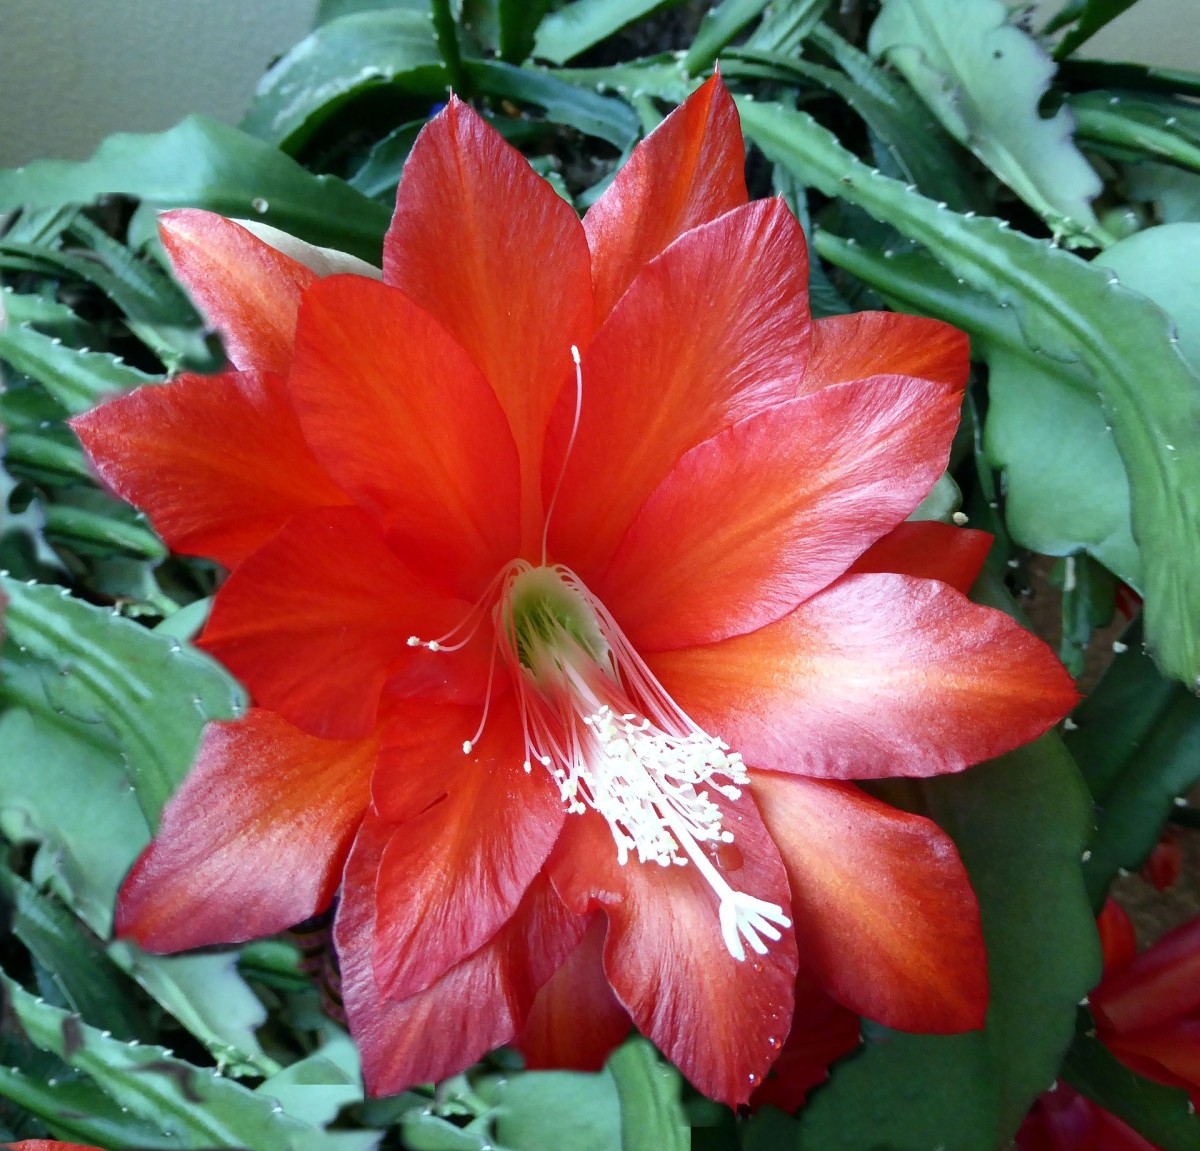 A showy red spring cactus bloom.